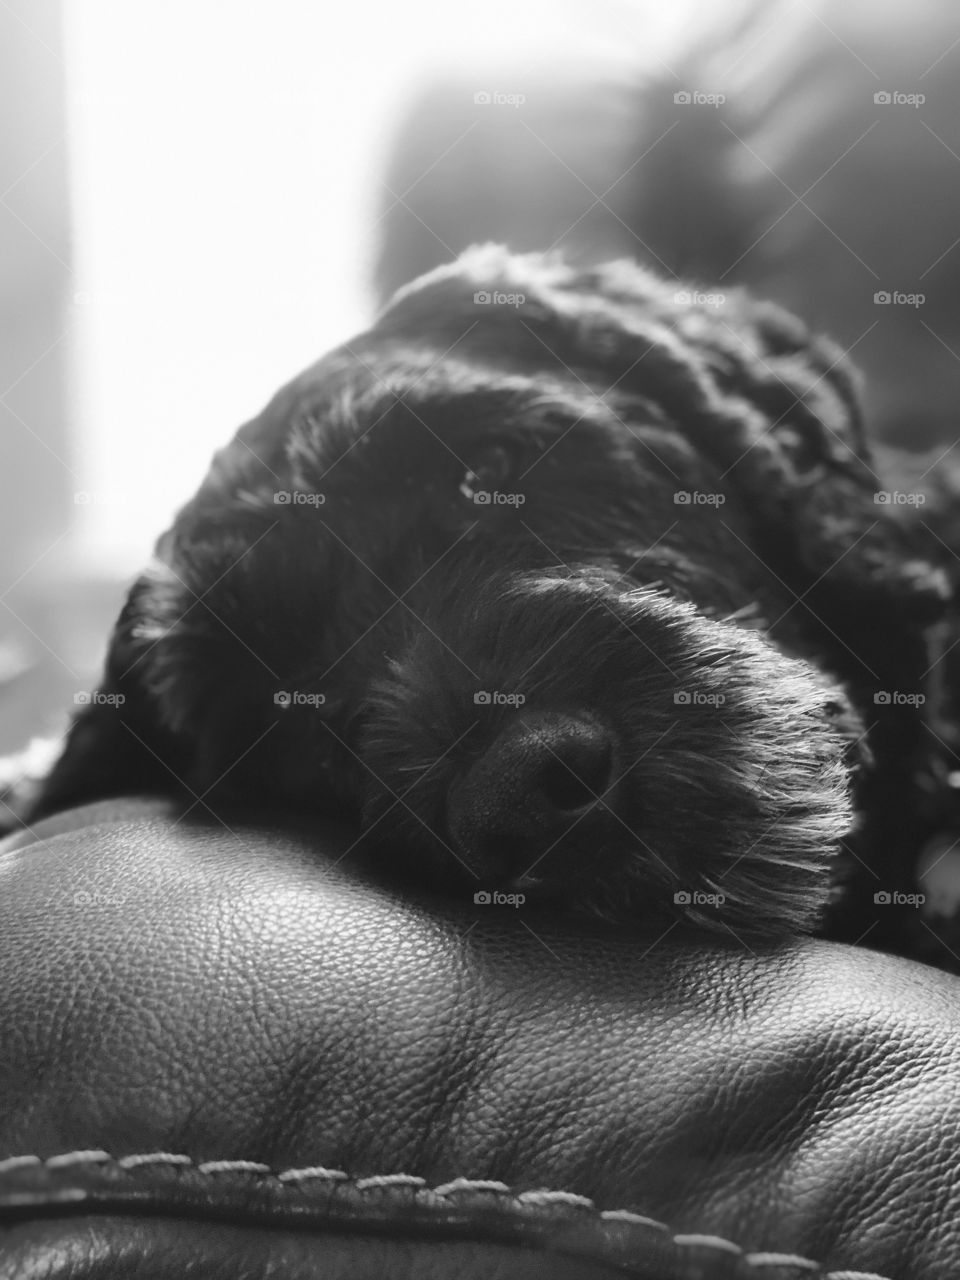 Monochrome Puppy On The Couch, Dog Laying Head On Couch Pillow, Puppy Staring At You, Black And White Dog Portrait 